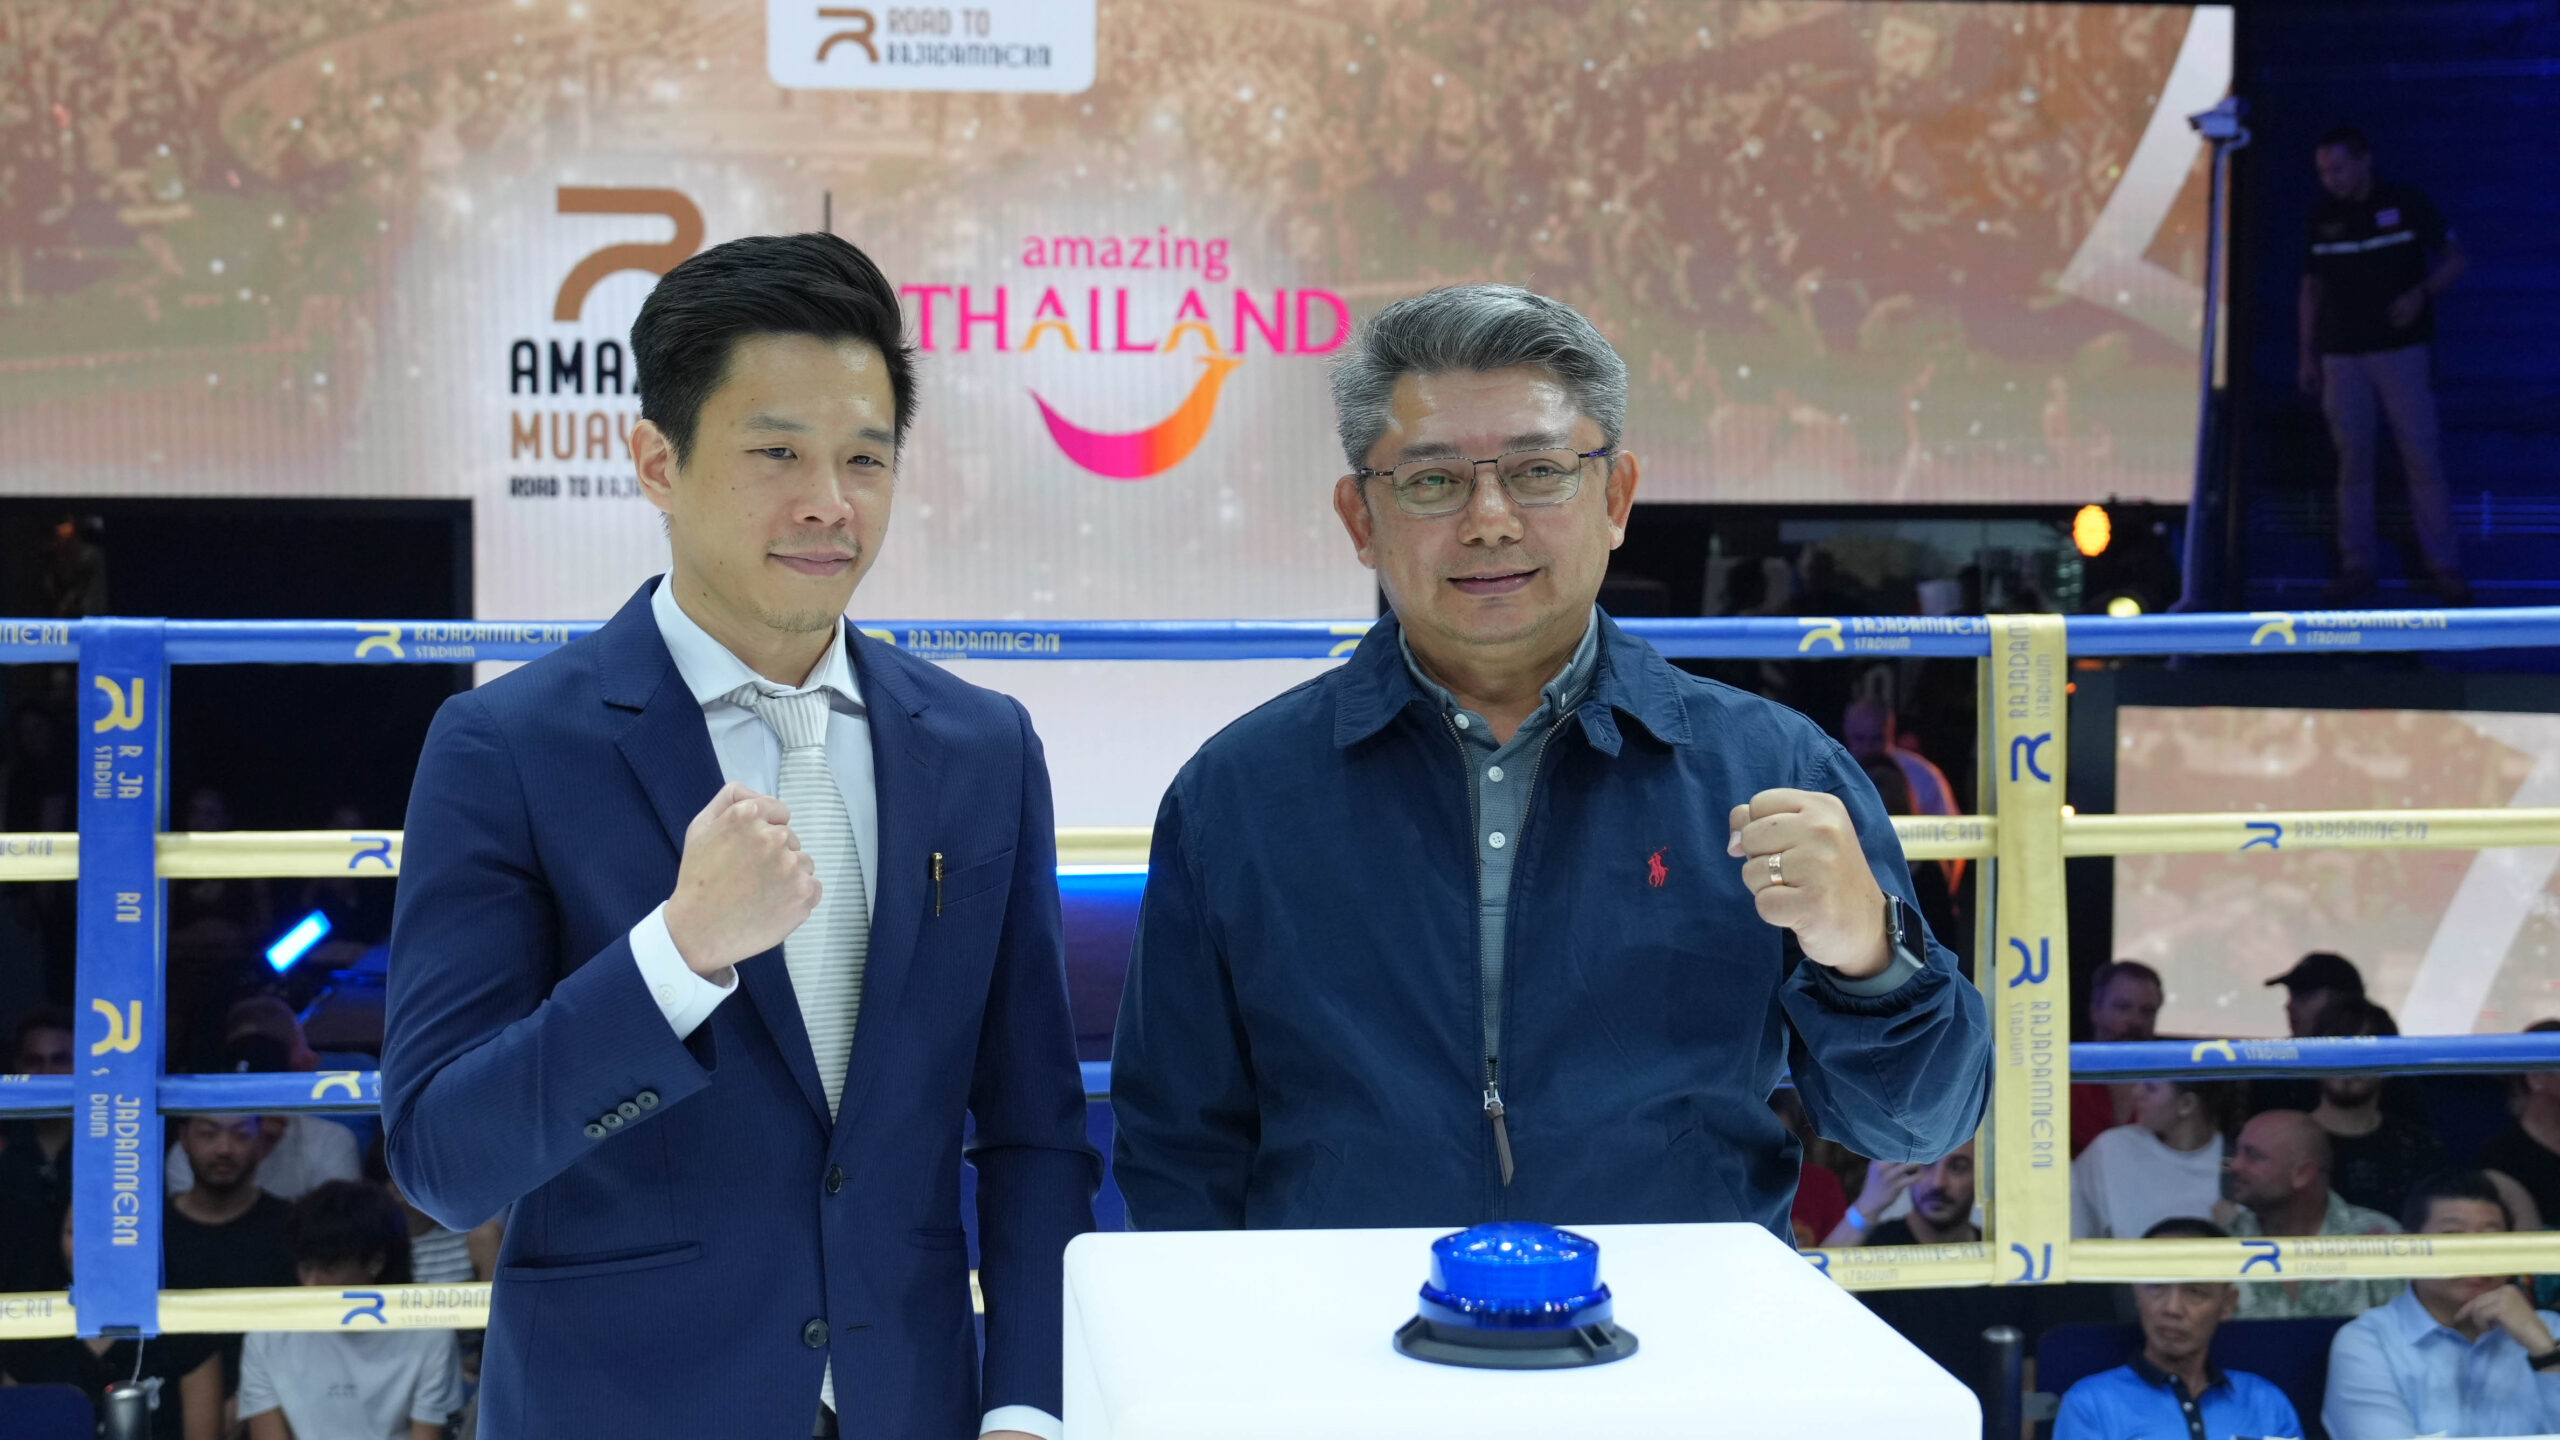 Mr. Thienchai Phisitwuttinan, CEO of Global Sport Ventures (GSV) and Executive Director of Rajadamnern Boxing Stadium